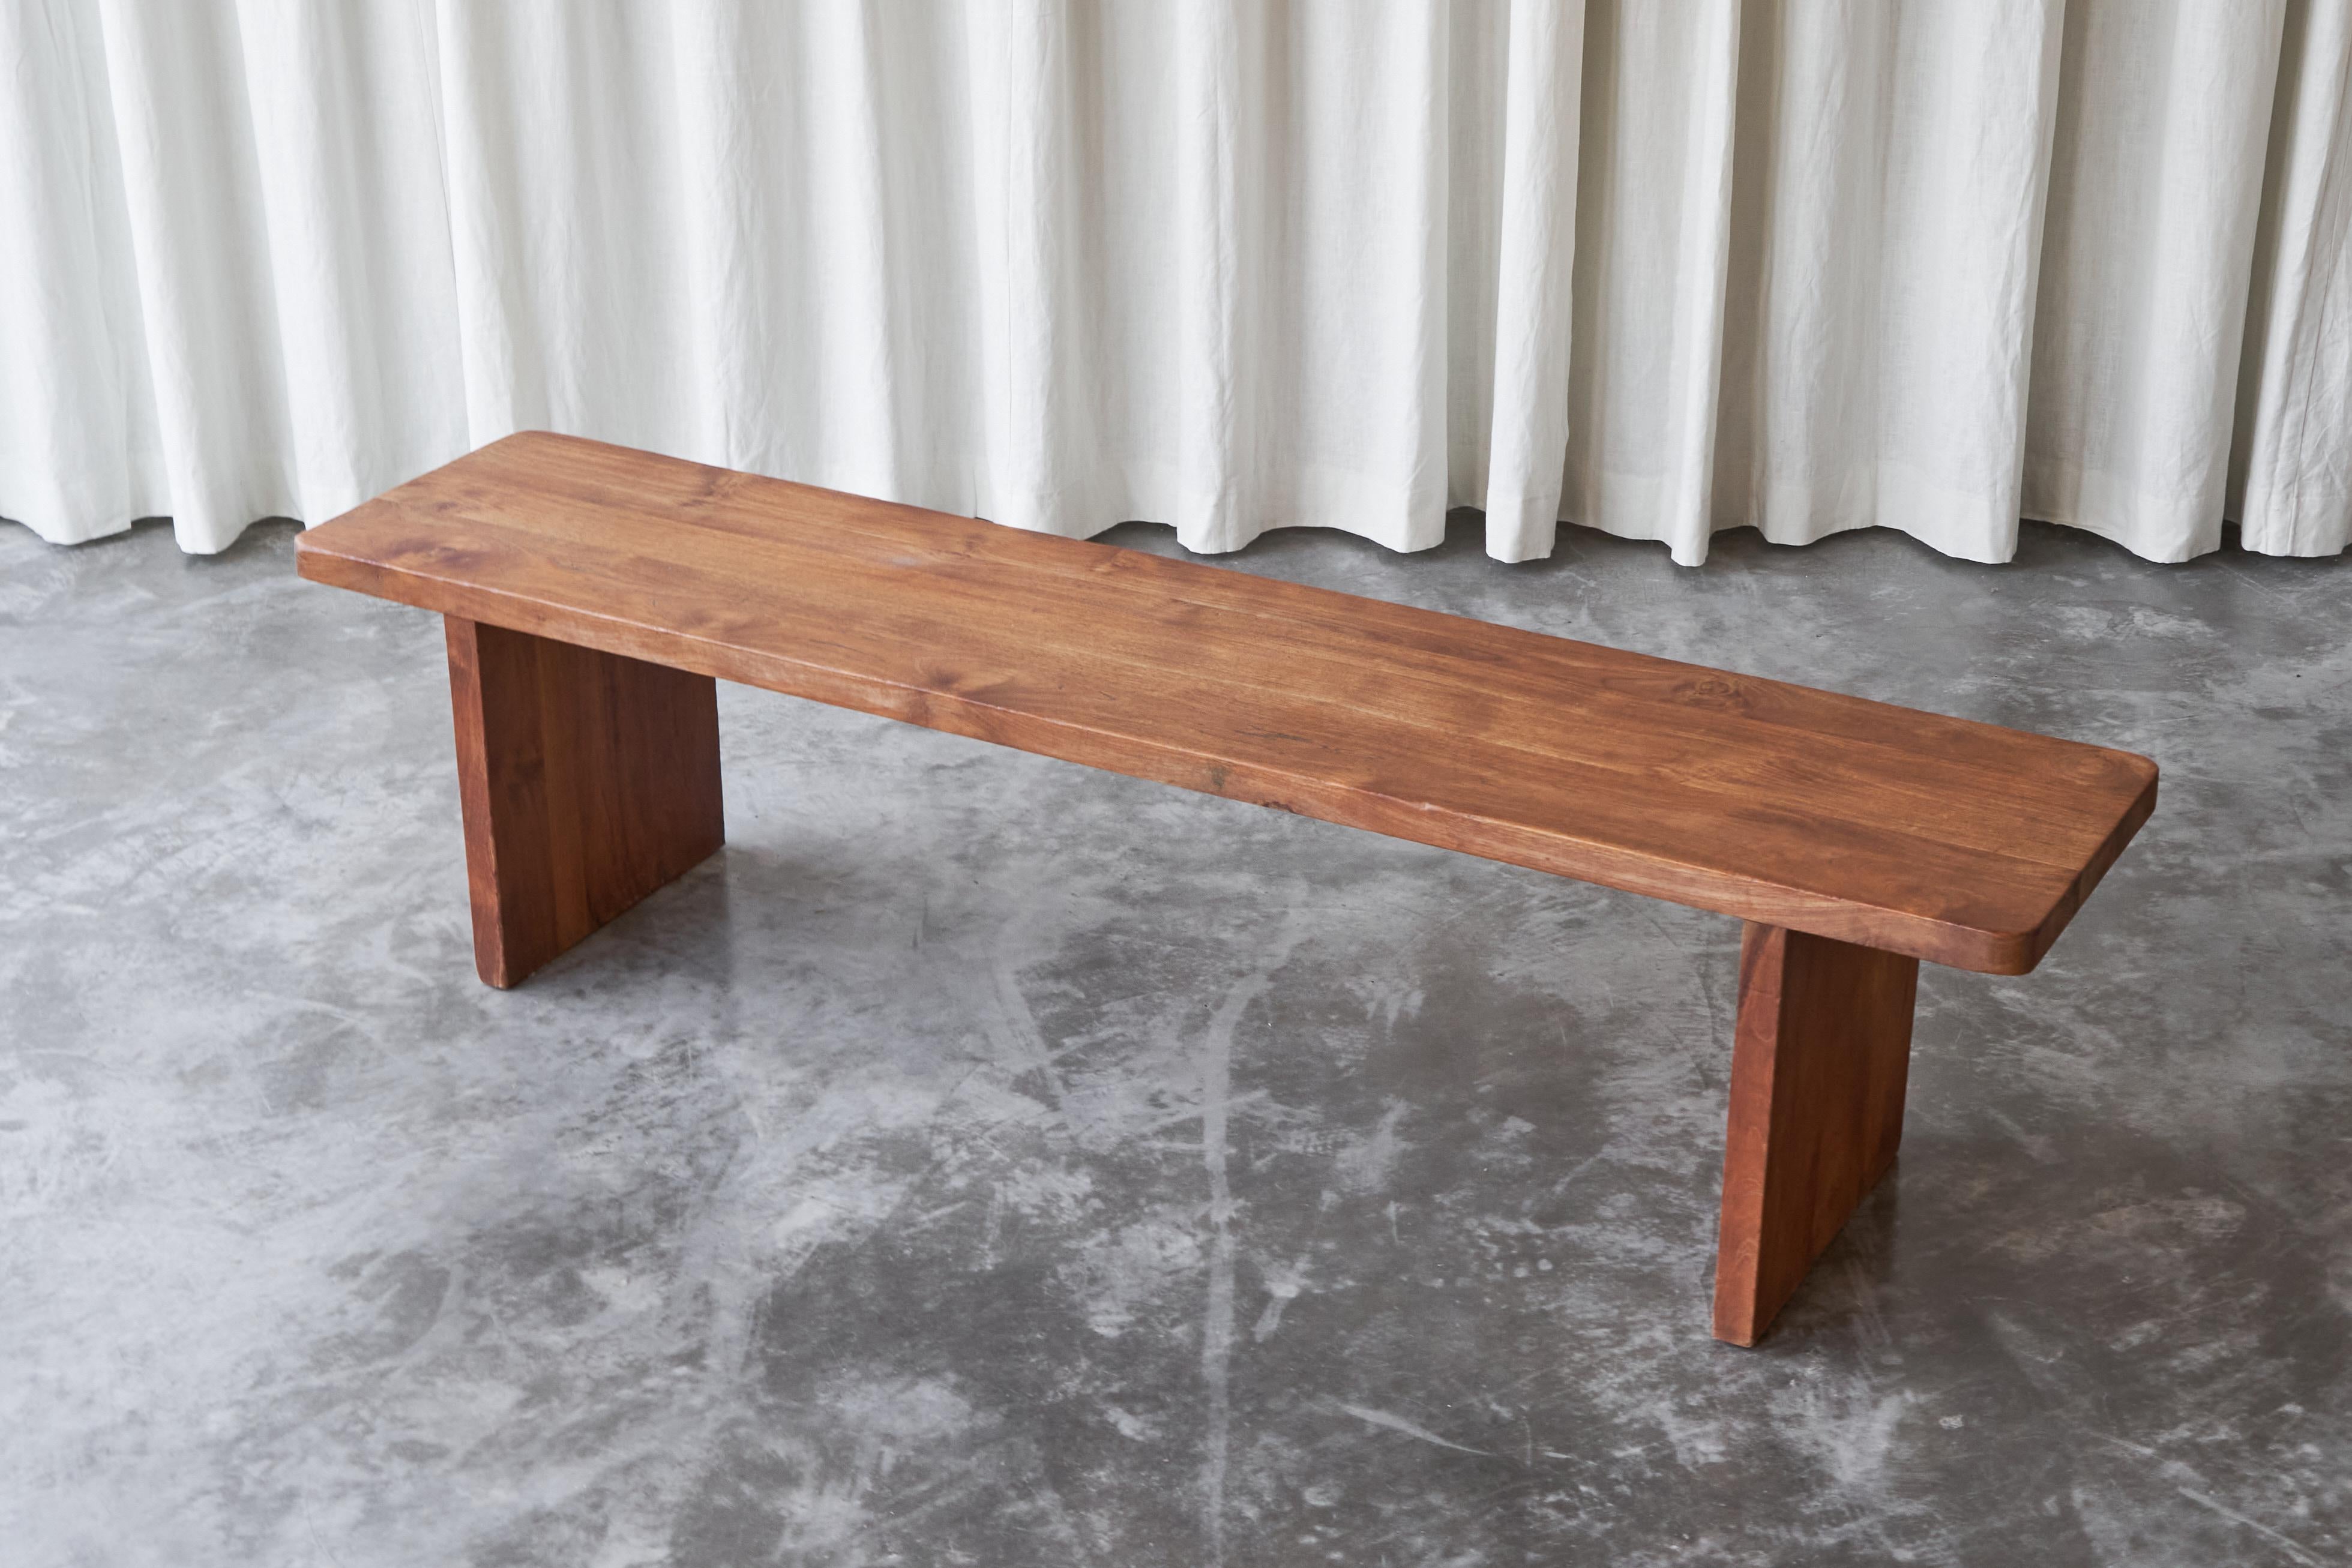 Bench in Solid Walnut, France, 1960s.

This unique mid century bench is well crafted in solid Walnut wood. It origins from France, 1960s and shows great similarity to the work of Pierre Chapo. Its design is basic, sturdy and sincere. The